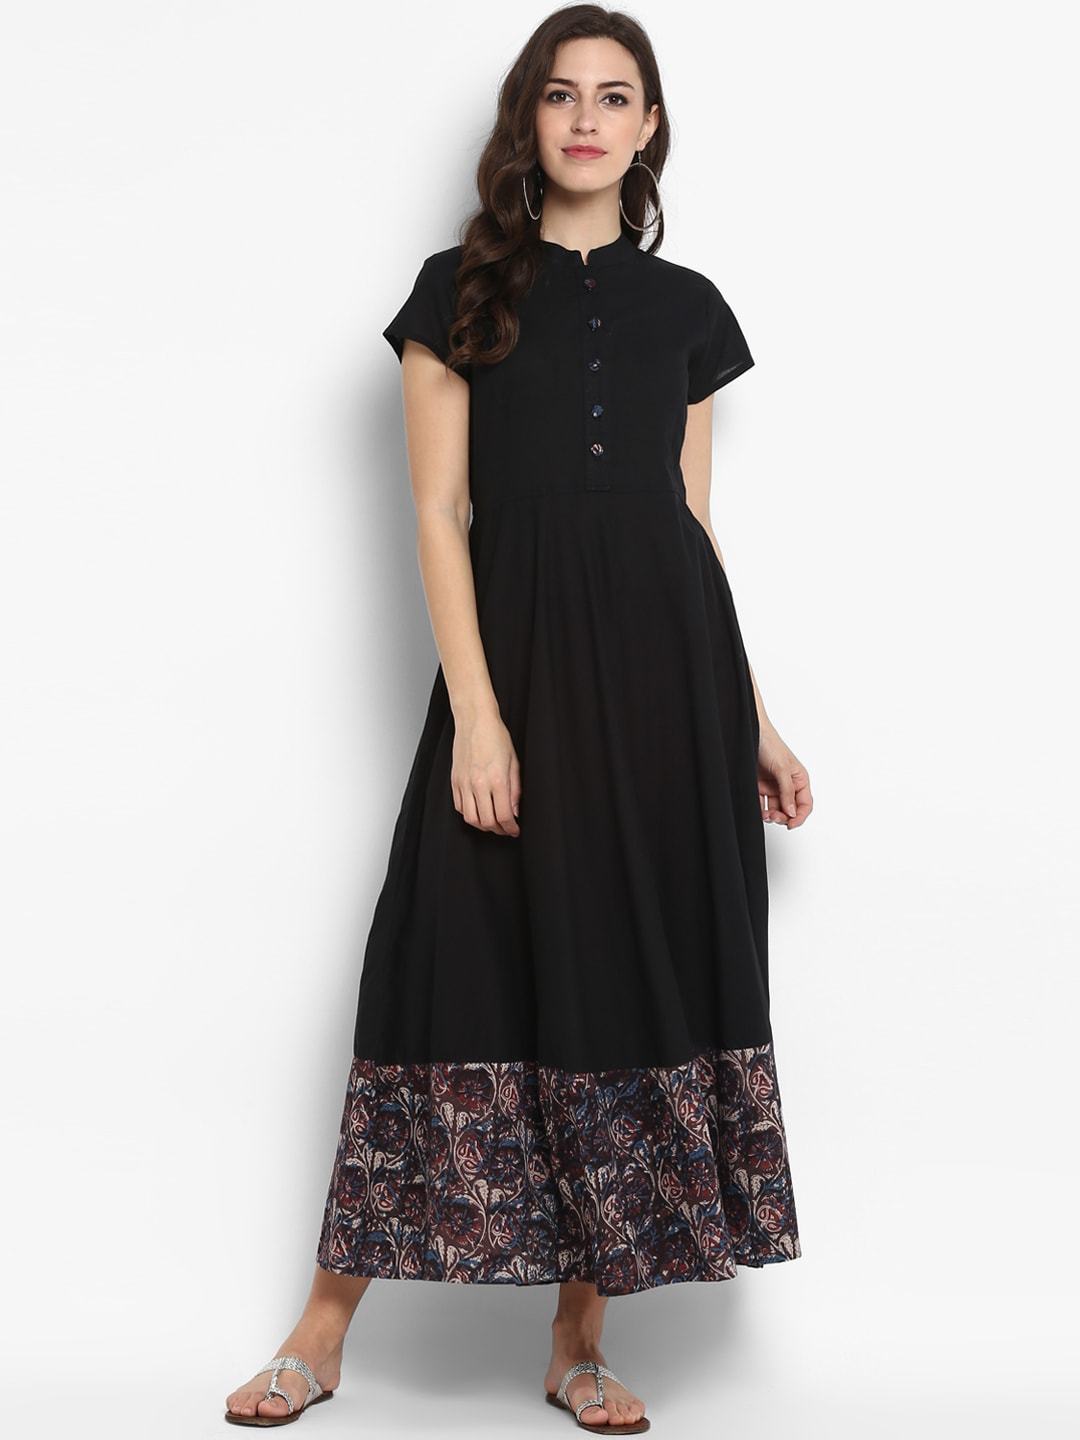 Women's Black Printed Fit and Flare Dress - Meeranshi